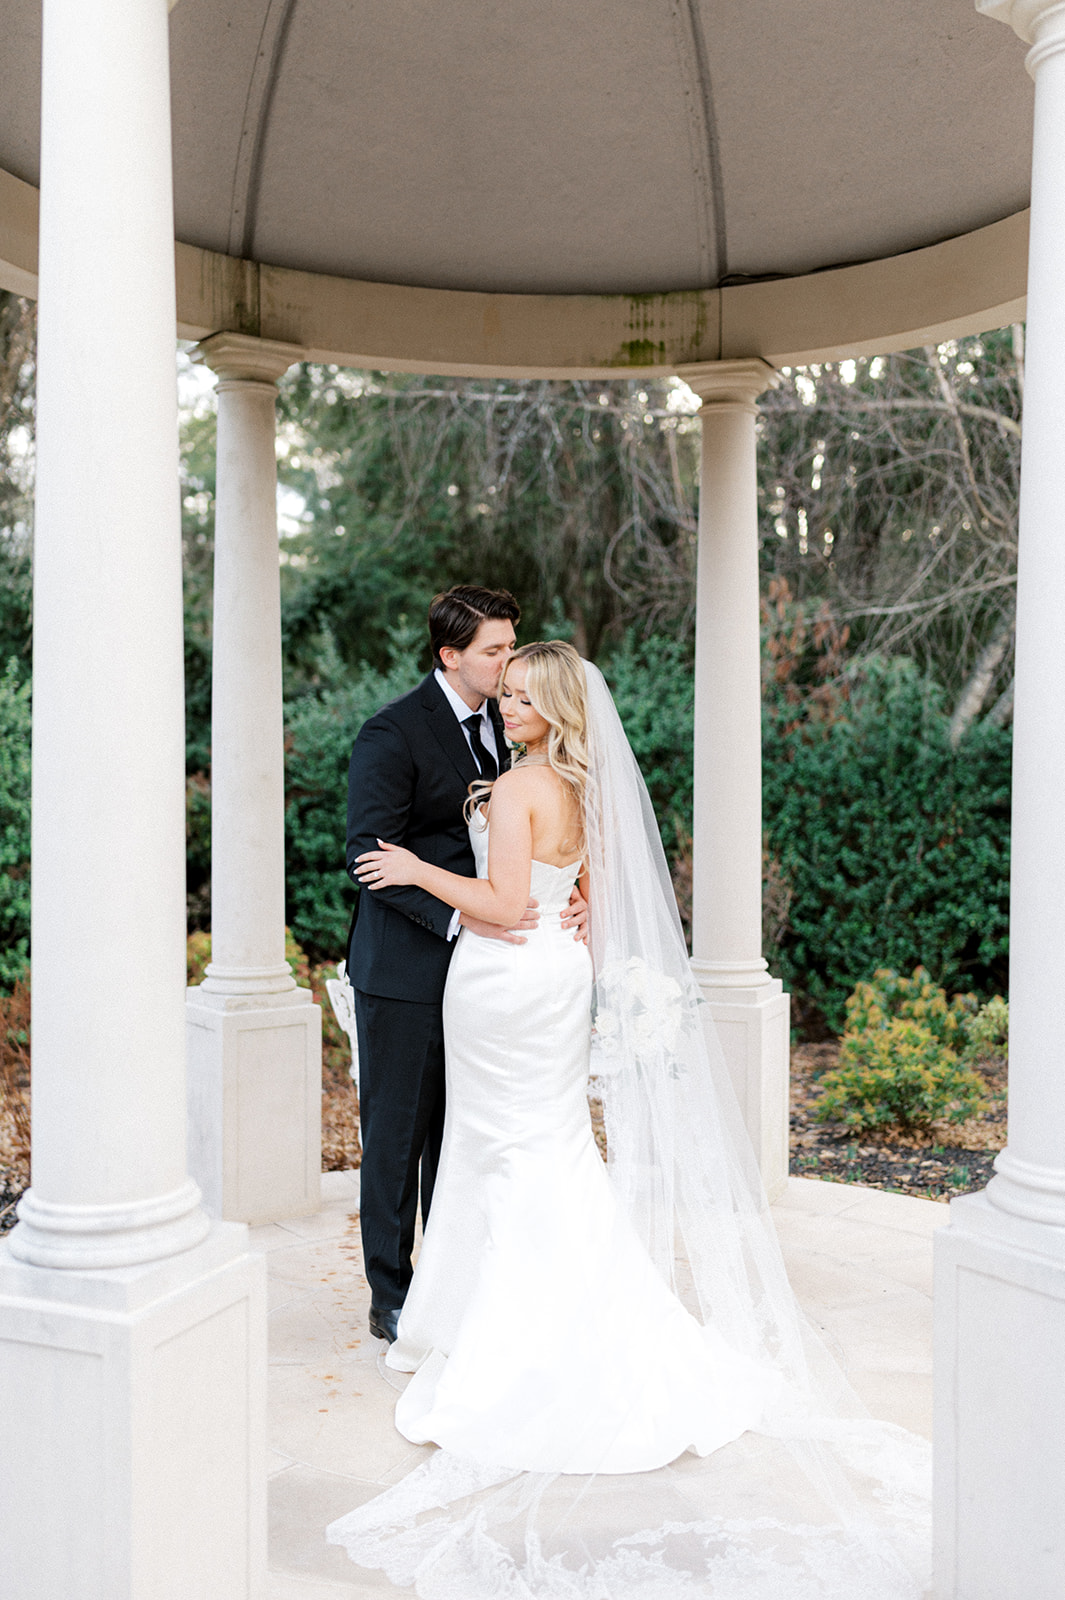 Bride and groom photos at Park Chateau wedding